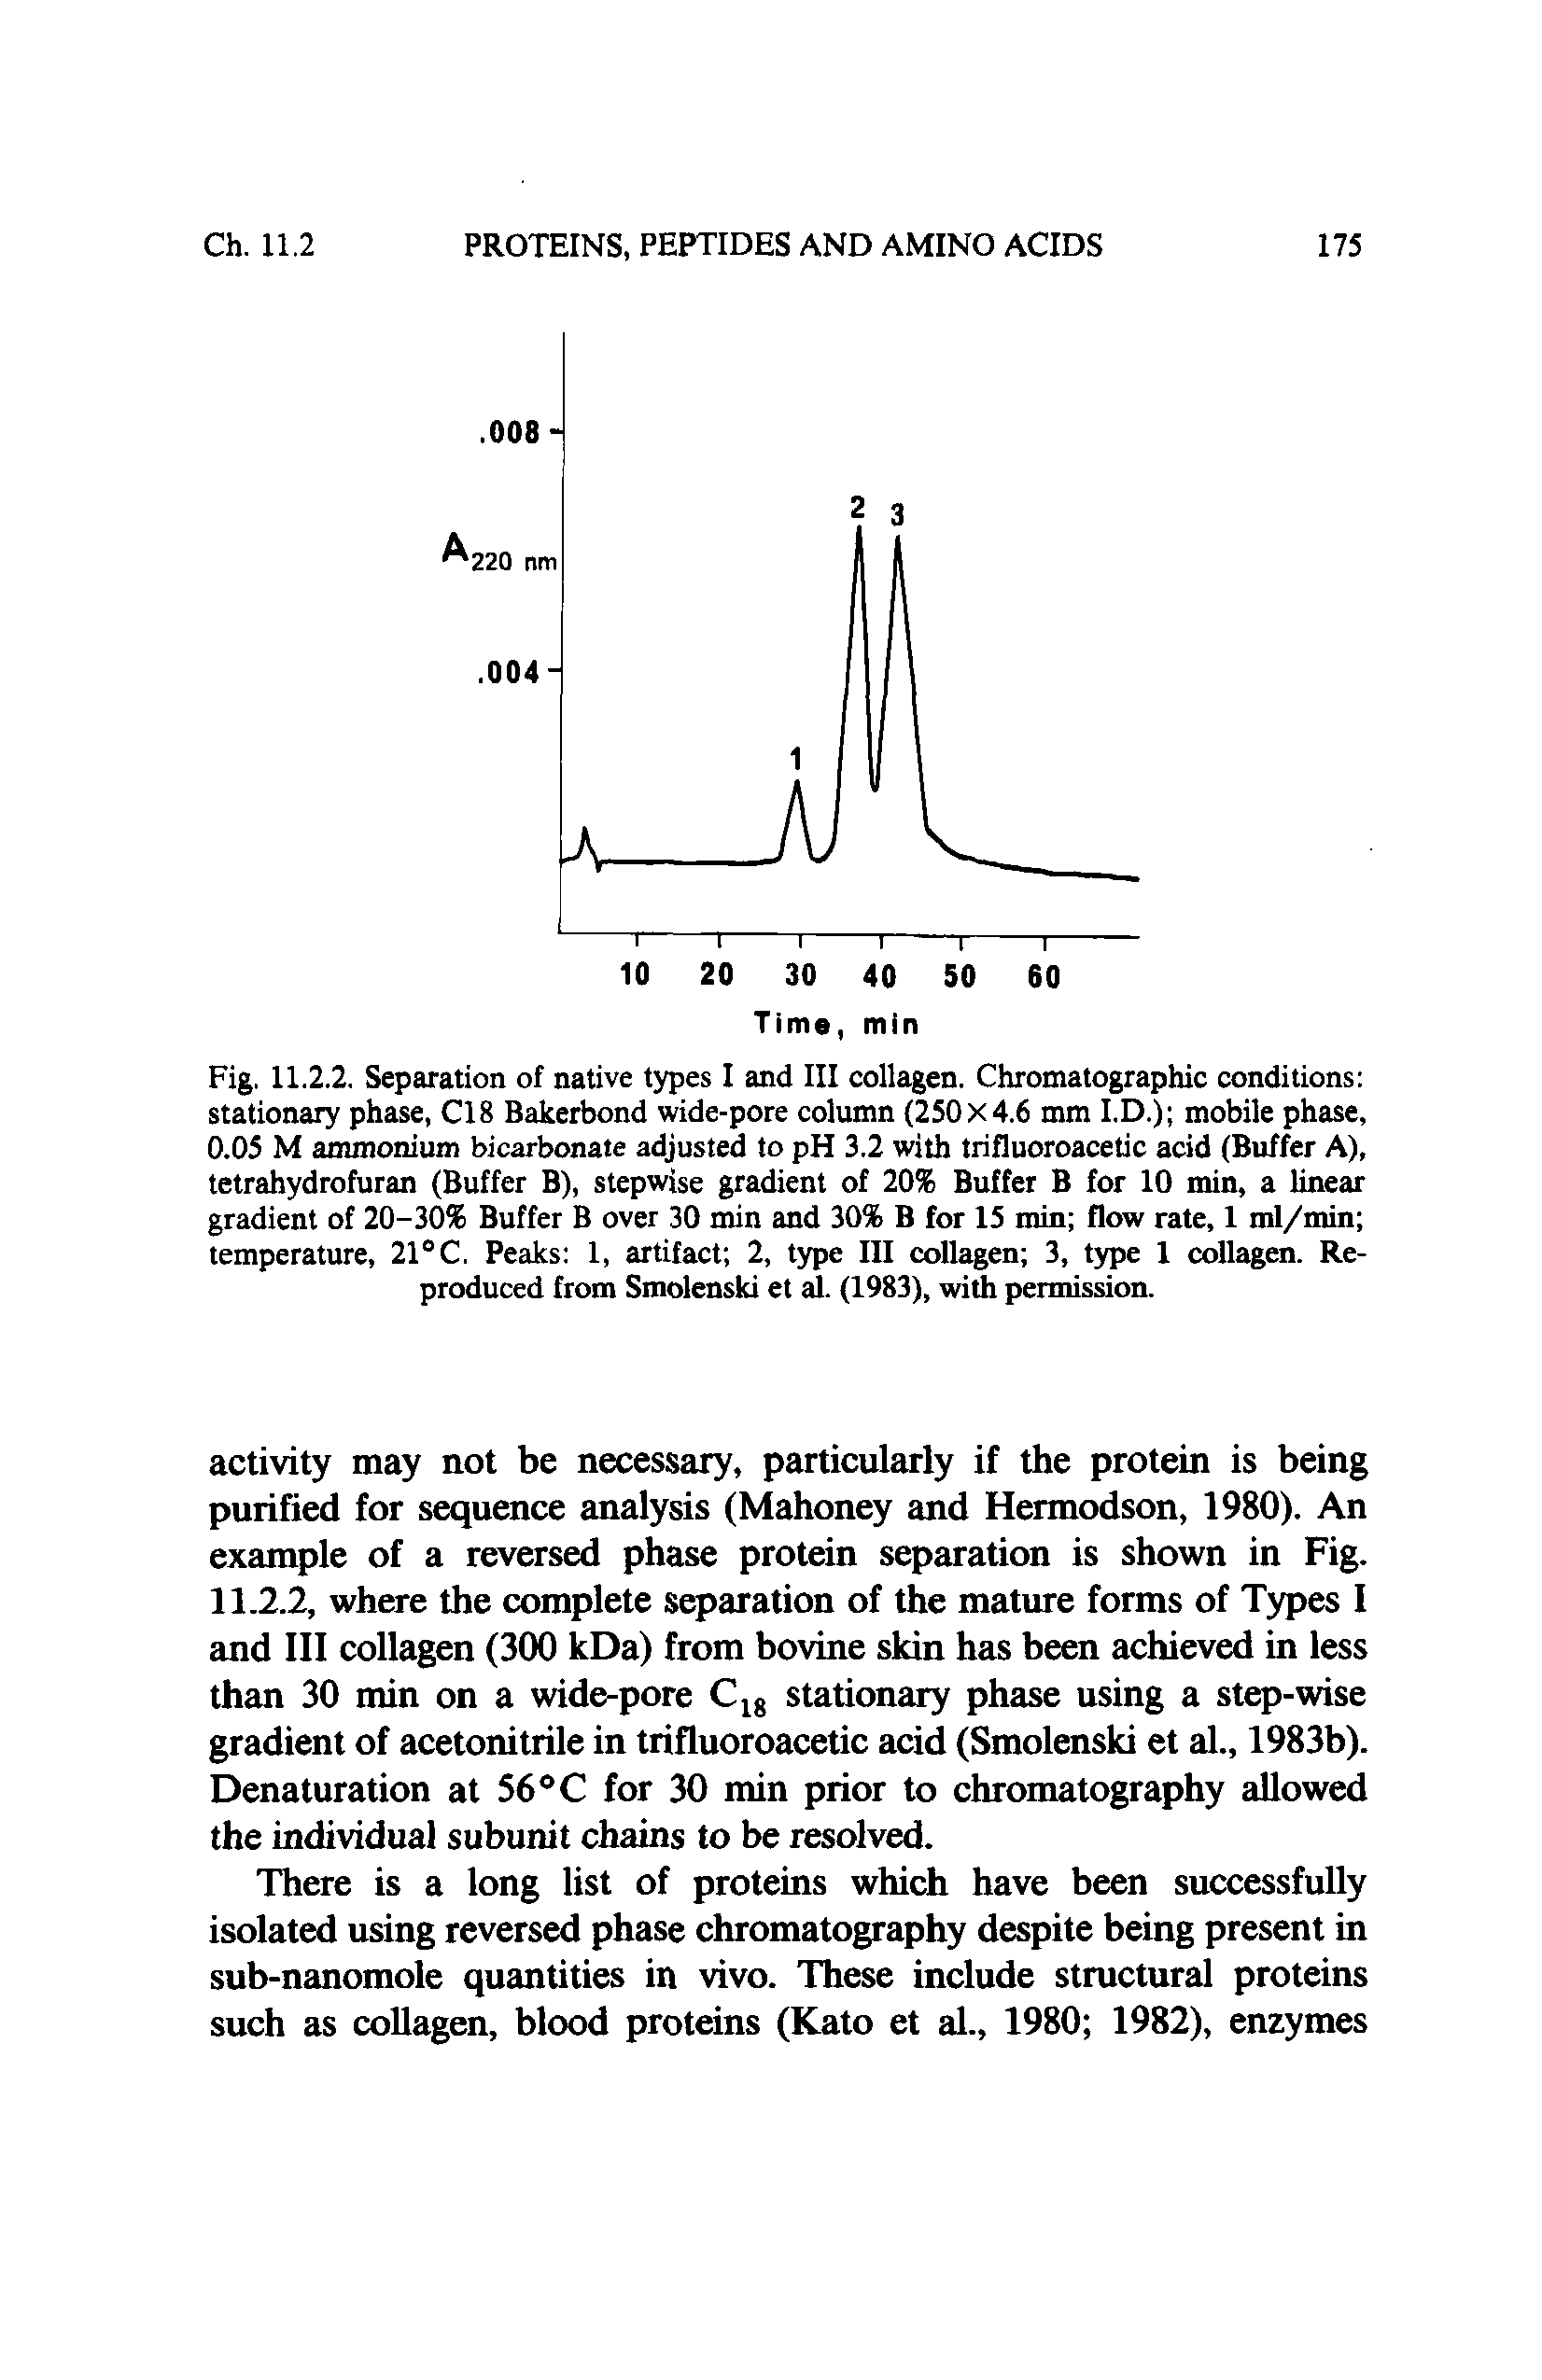 Fig. 11.2.2, Separation of native types I and III collagen. Chromatographic conditions stationary phase, CIS Bakerbond wide-pore column (250x4.6 mm I.D.) mobile phase, 0.05 M ammonium bicarbonate adjusted to pH 3.2 with trifluoroacetic acid (Buffer A), tetrahydrofuran (Buffer B), stepwise gradient of 20% Buffer B for 10 min, a linear gradient of 20-30% Buffer B over 30 min and 30% B for 15 min flow rate, 1 ml/min temperature, 21°C. Peaks 1, artifact 2, type III collagen 3, type 1 collagen. Reproduced from Smolensk et al. (1983), with permission.